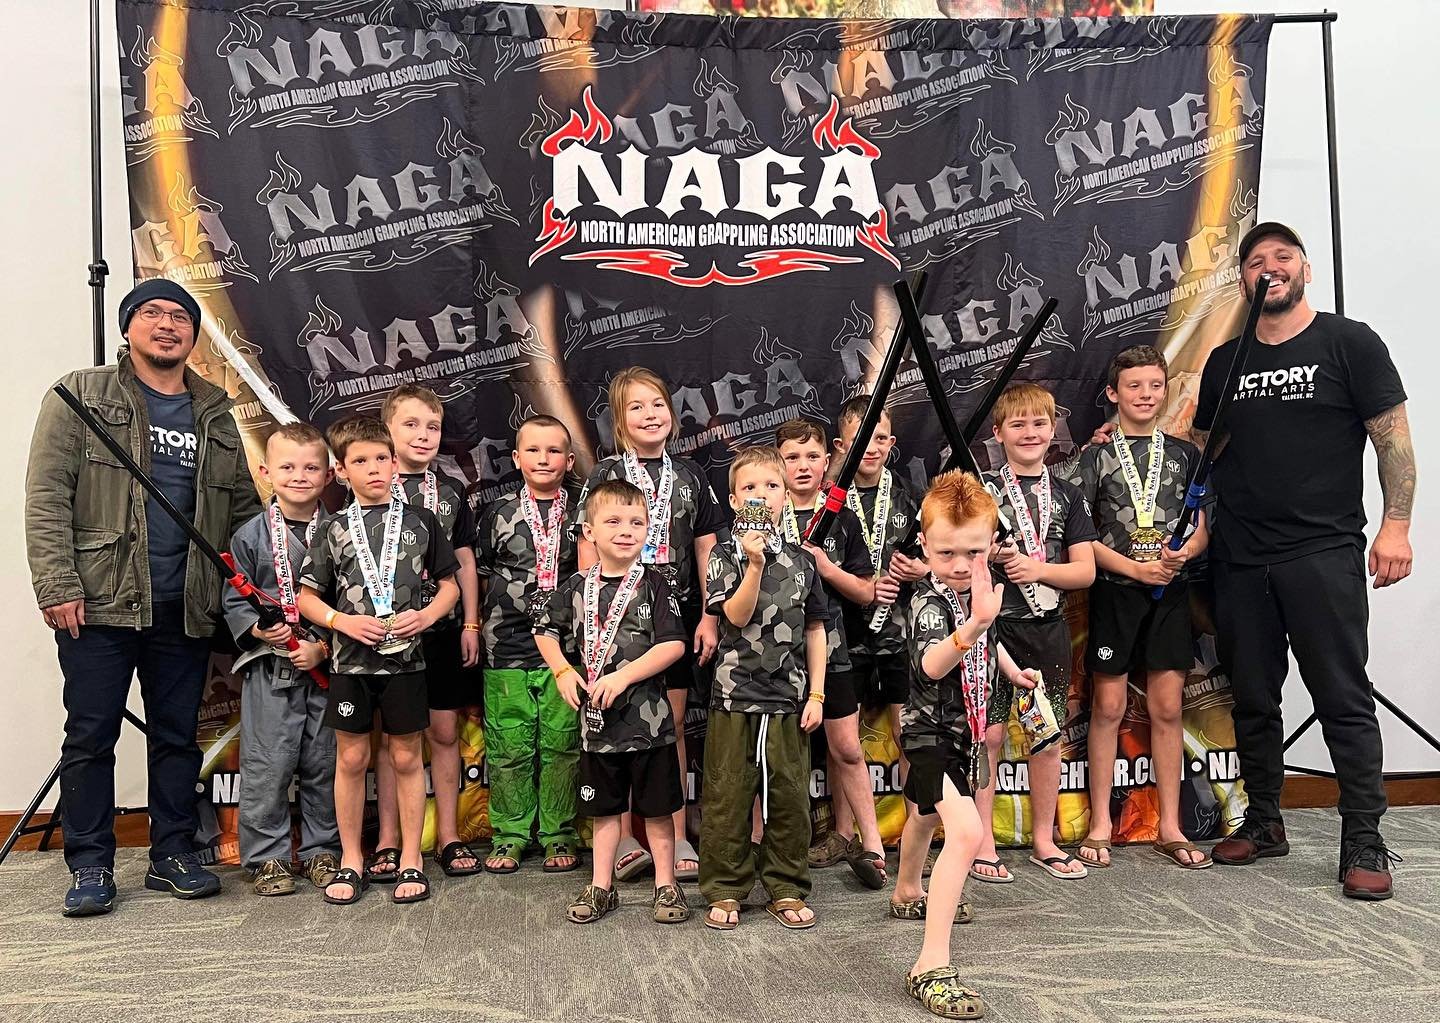 Just wrapped up another amazing tournament for the Victory squad. The kids competition team showed out today. 

12 competitors - 20 medals 🥇

8 gold 🥇
9 silver 🥈
3 bronze 🥉

3 of those were double gold. 

Liam 🥇🥇
Nolan 🥉
Axel 🥉
Shane 🥈
Adam 